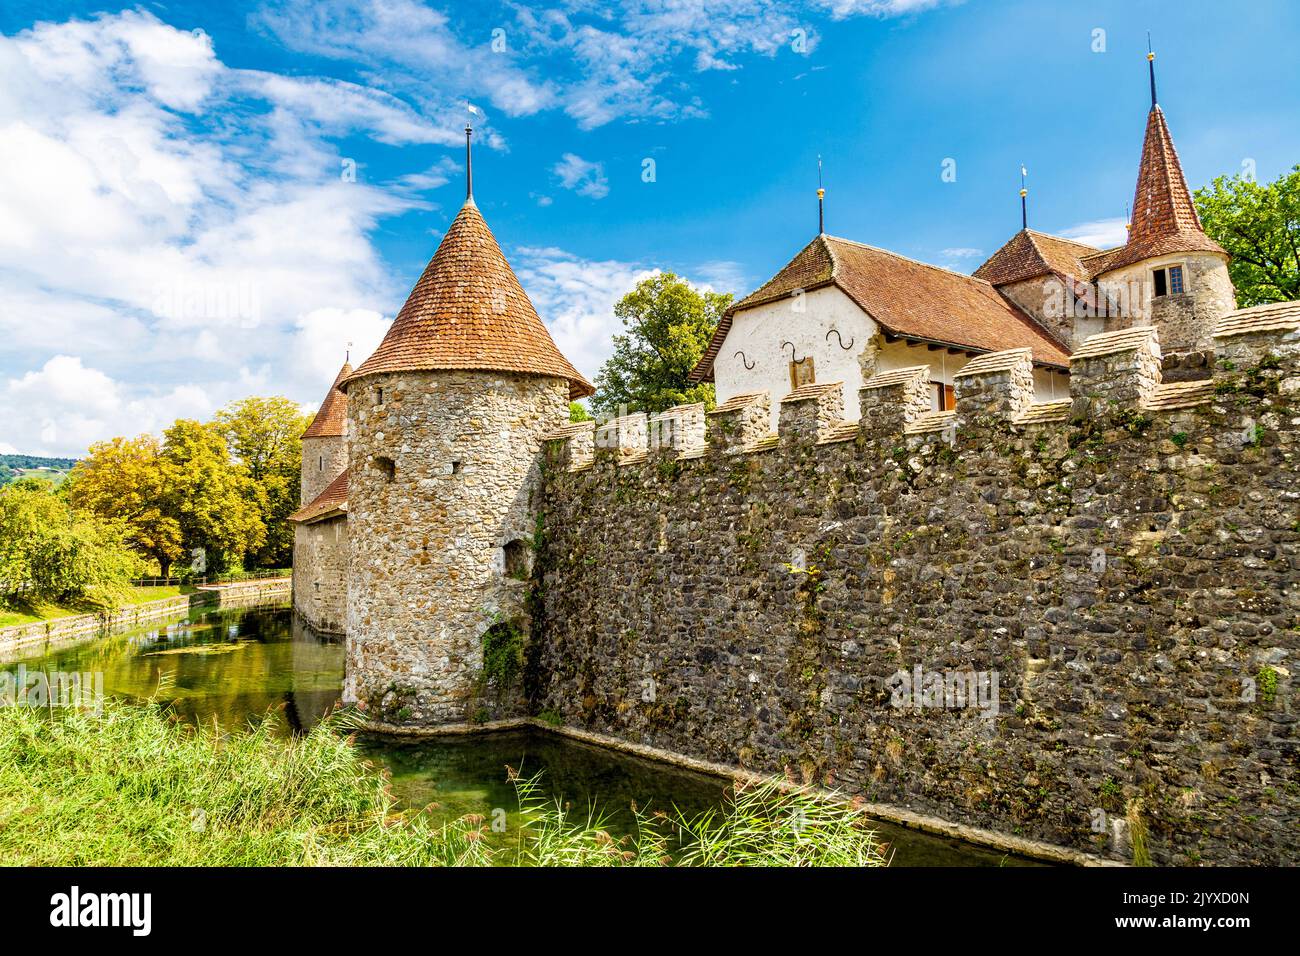 Medieval 13th-century Hallwyl Castle surrounded by a moat on the River Aabach, Seengen, Aargau Canton, Switzerland Stock Photo